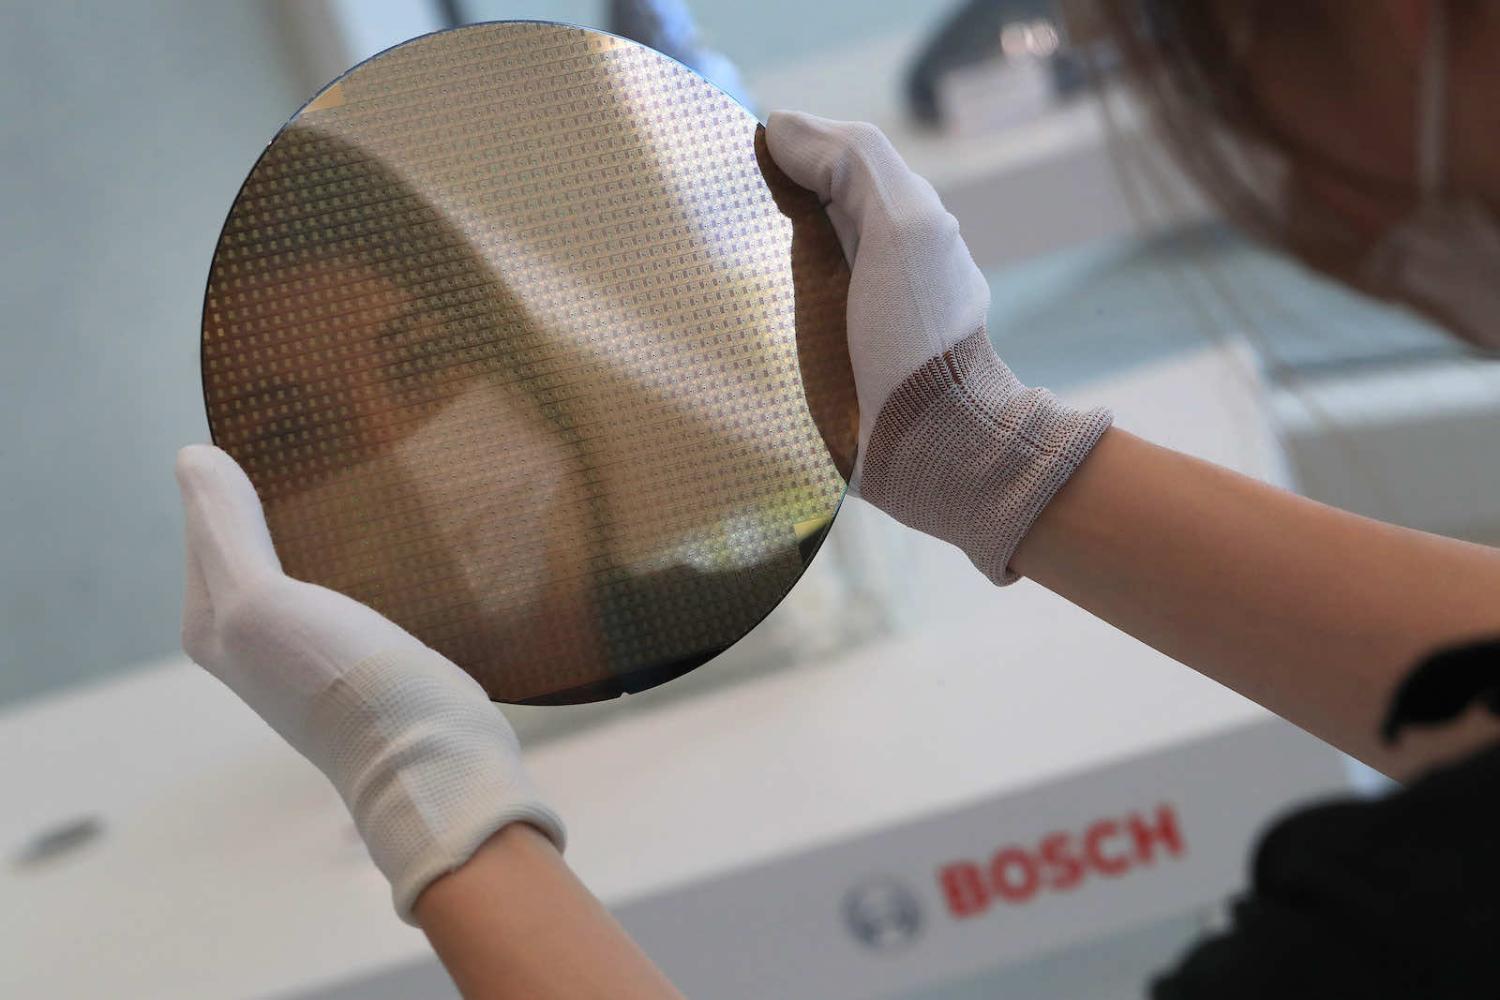 A silicon wafer at the semiconductor fabrication plant operated by Robert Bosch GmbH in Dresden, Germany (Krisztian Bocsi/Bloomberg via Getty Images)